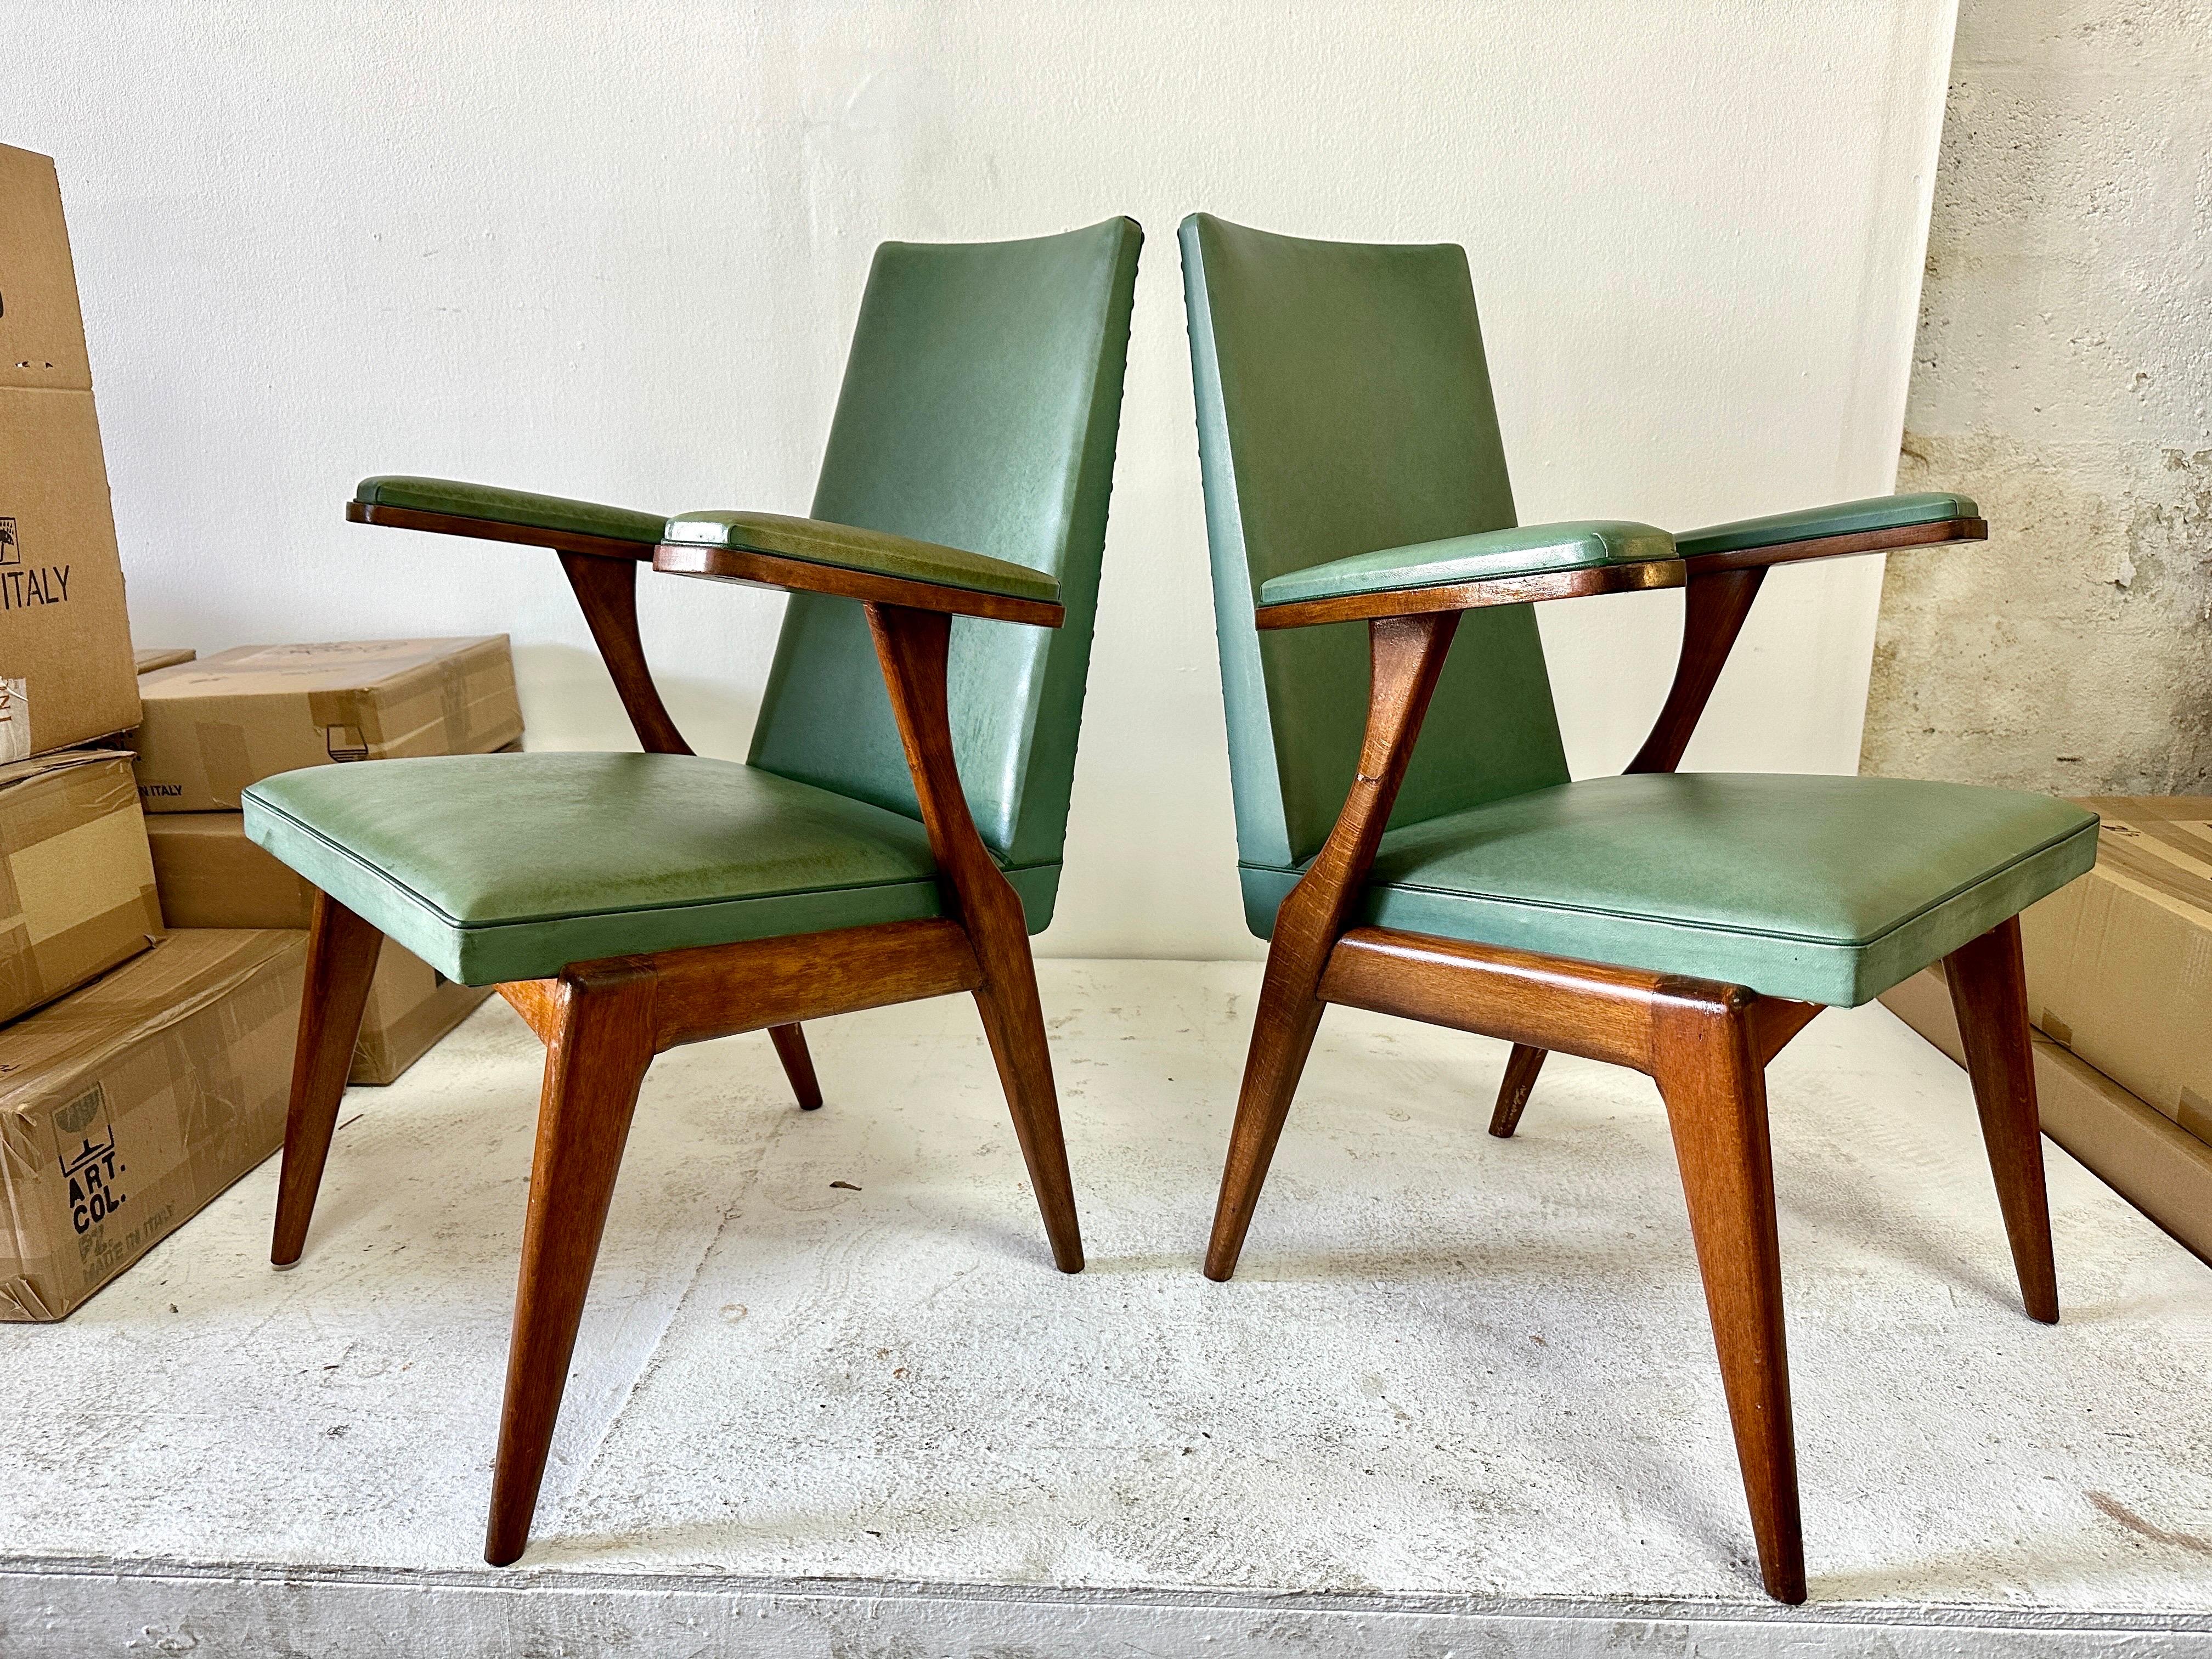 Very sleek and hard to find, this is a pair of floating arm-rest chairs with original faux leather green upholstery (original vintage condition). They will add uniqueness to any design - can be used as host/hostess chairs, side chairs and more!